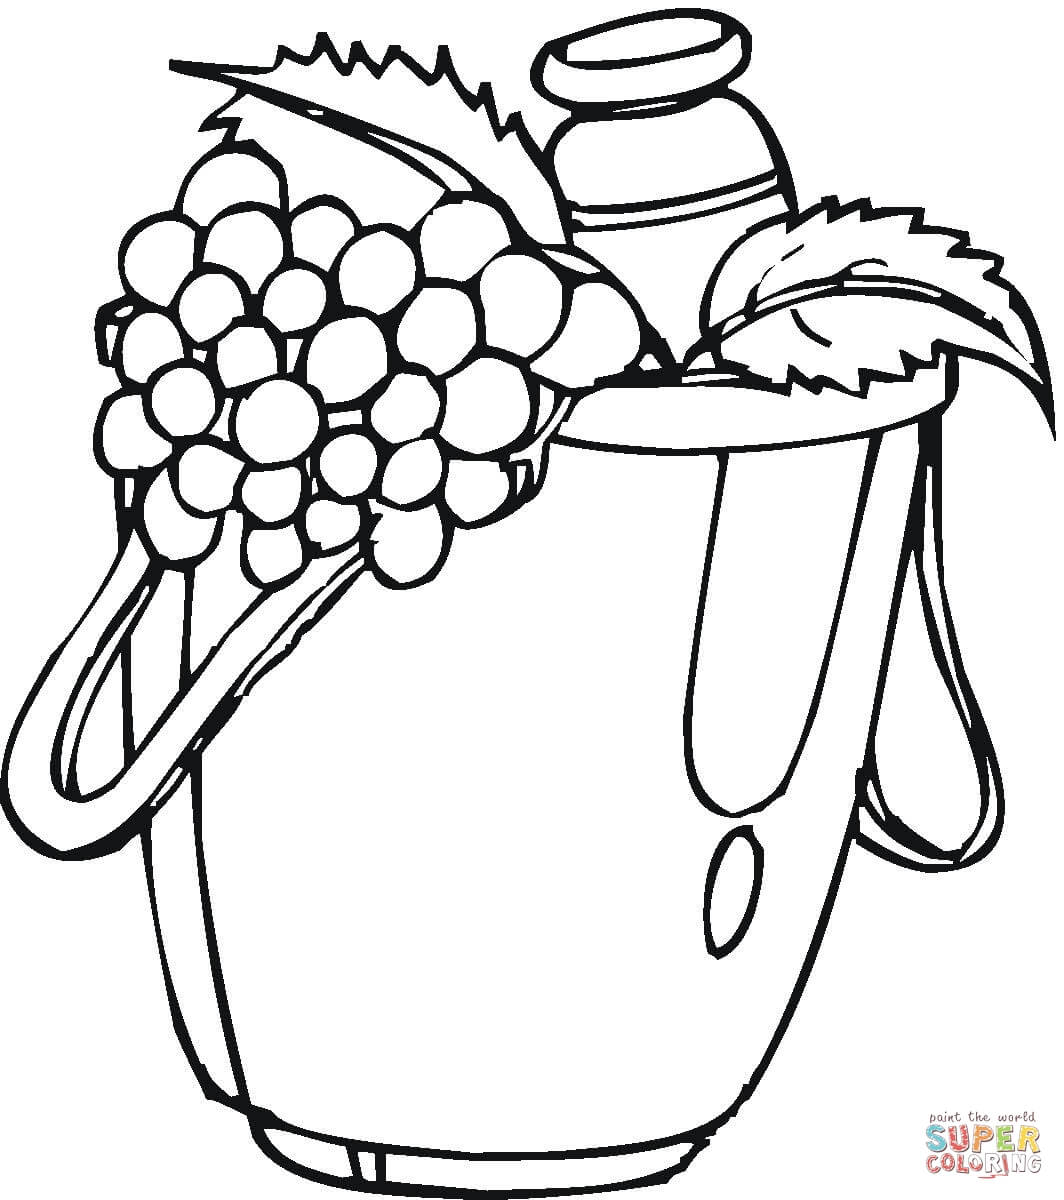 Coconut milk coloring page | Free Printable Coloring Pages